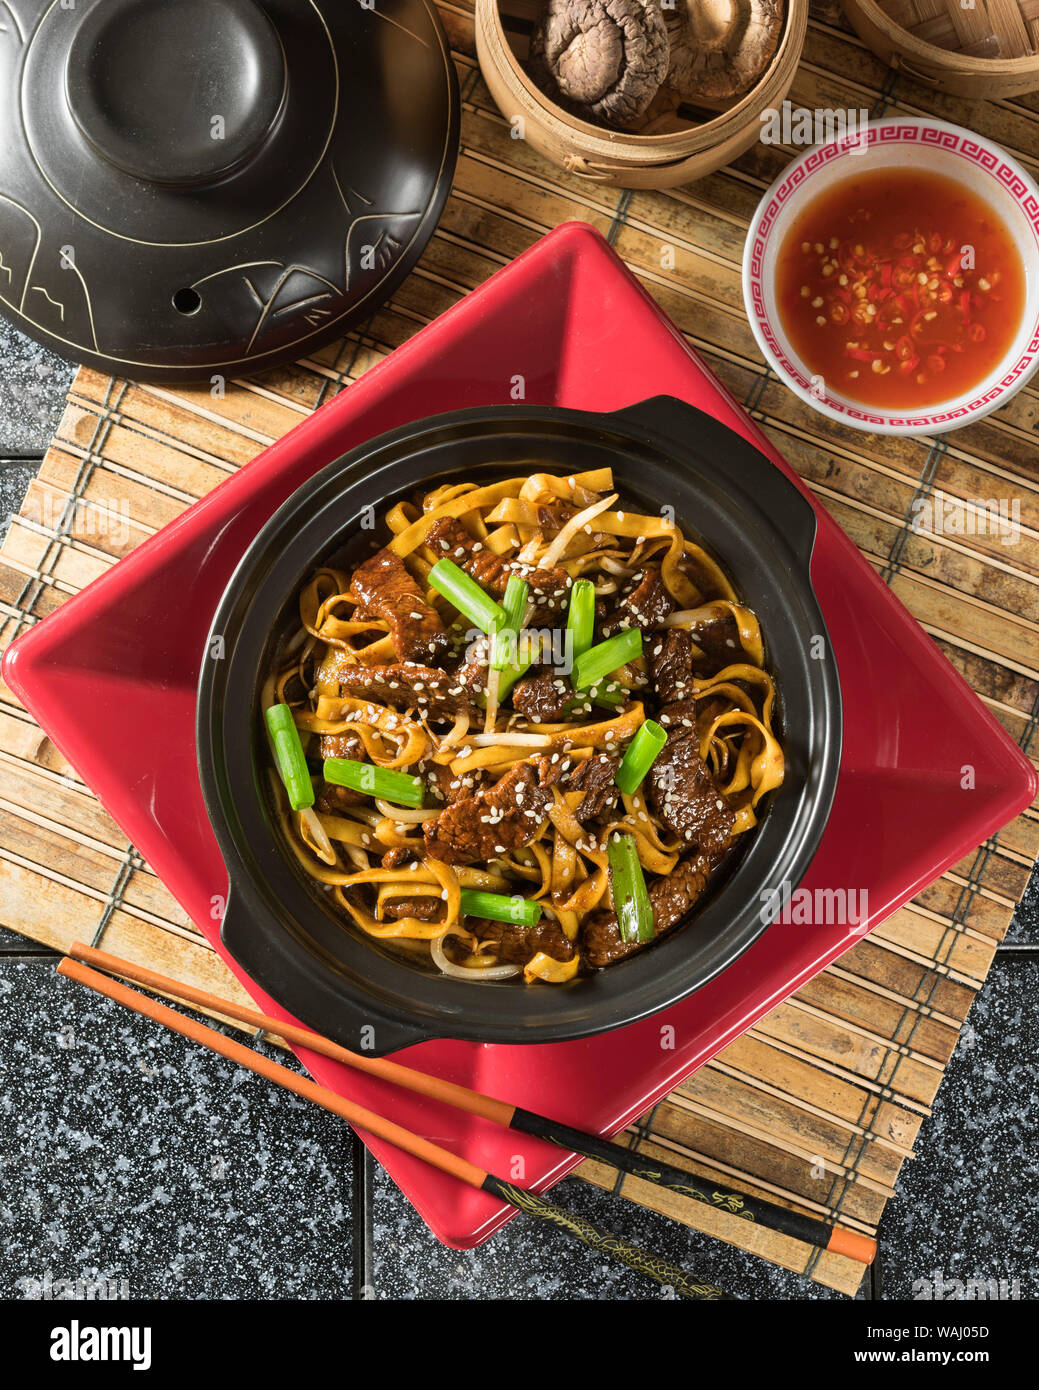 Beef chow fun. Cantonese noodle stir fry. Chinese Food Stock Photo